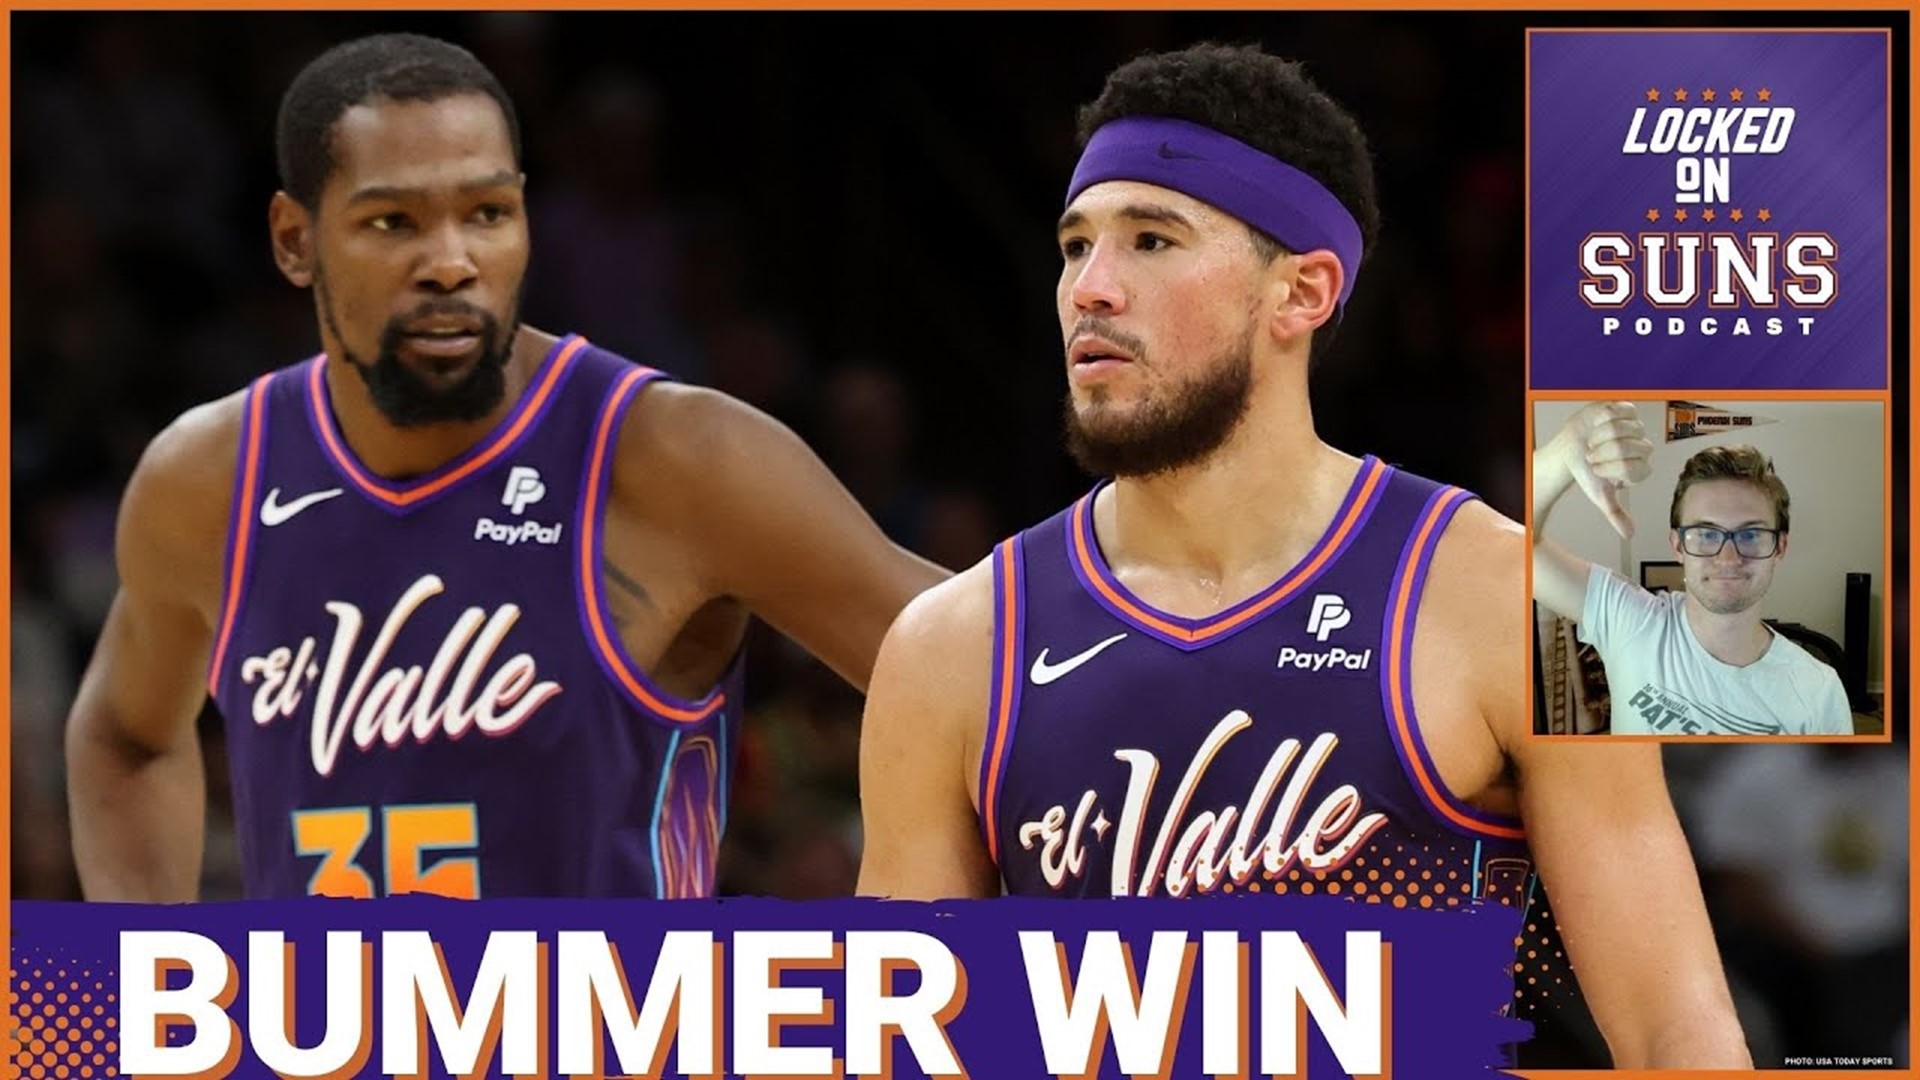 Devin Booker was the only Phoenix Suns player who took it upon himself to make up for an ugly loss on Tuesday night with a road win over the Clippers, 124-108.